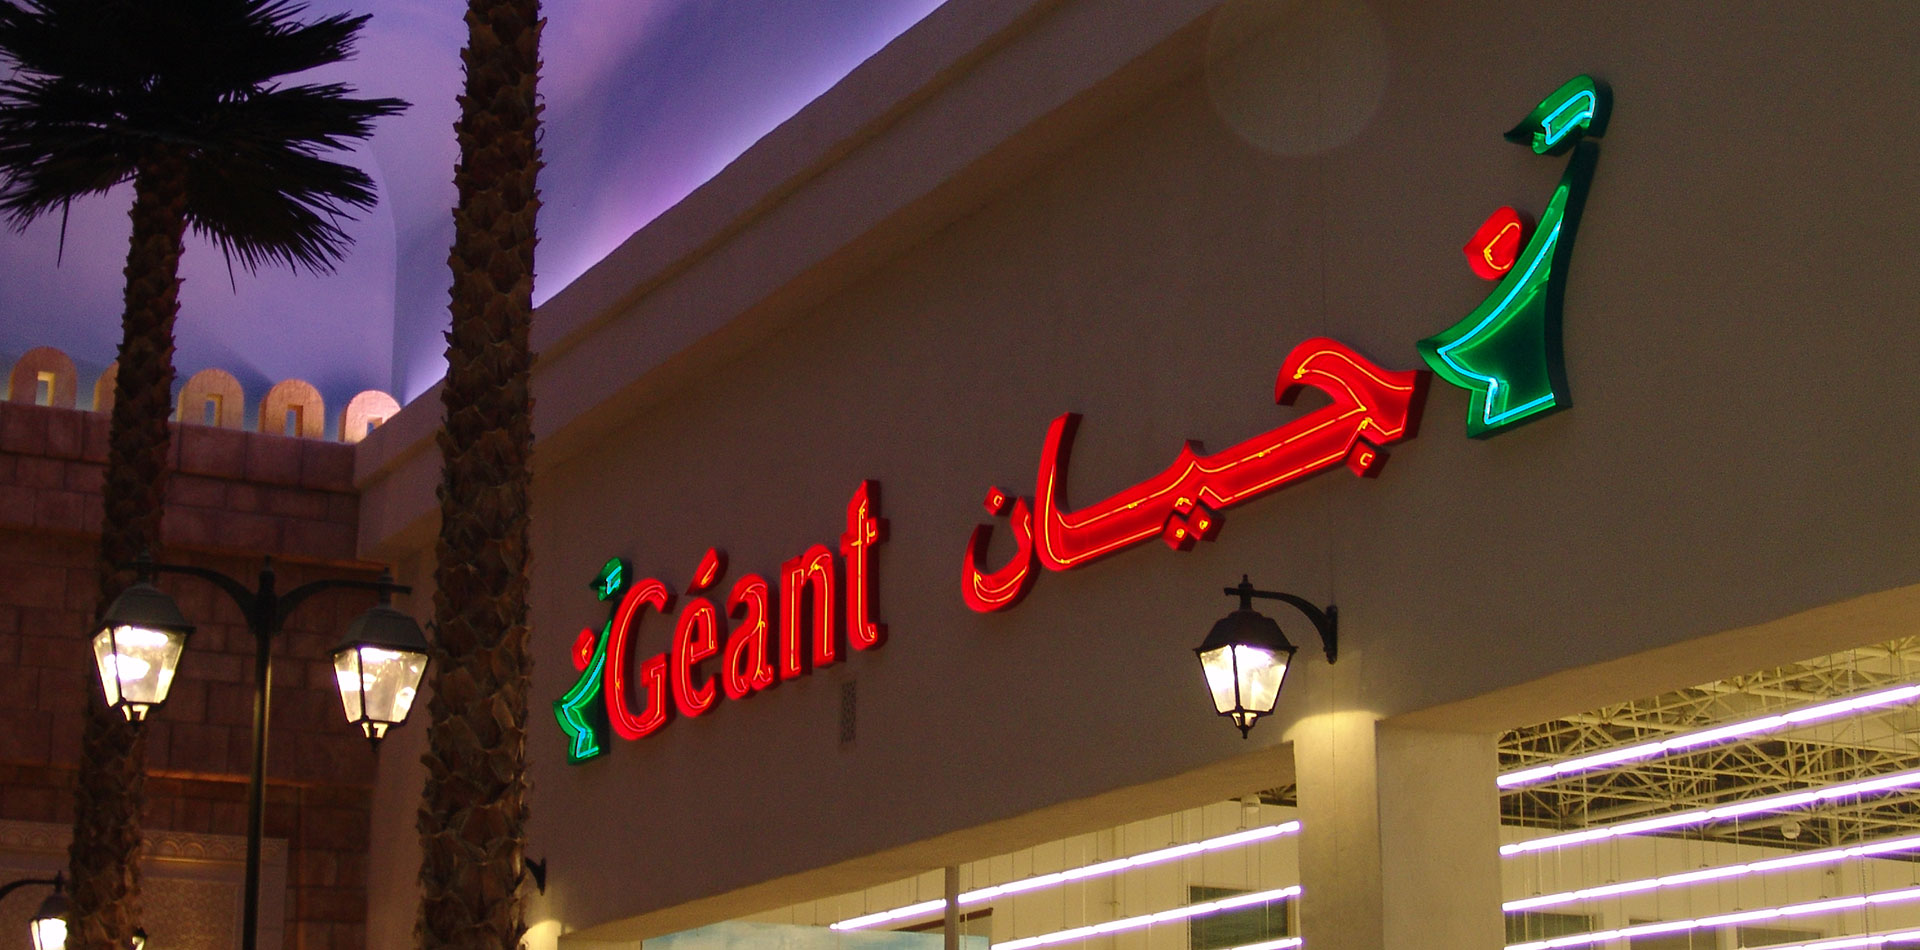 Blade Signage of Geant